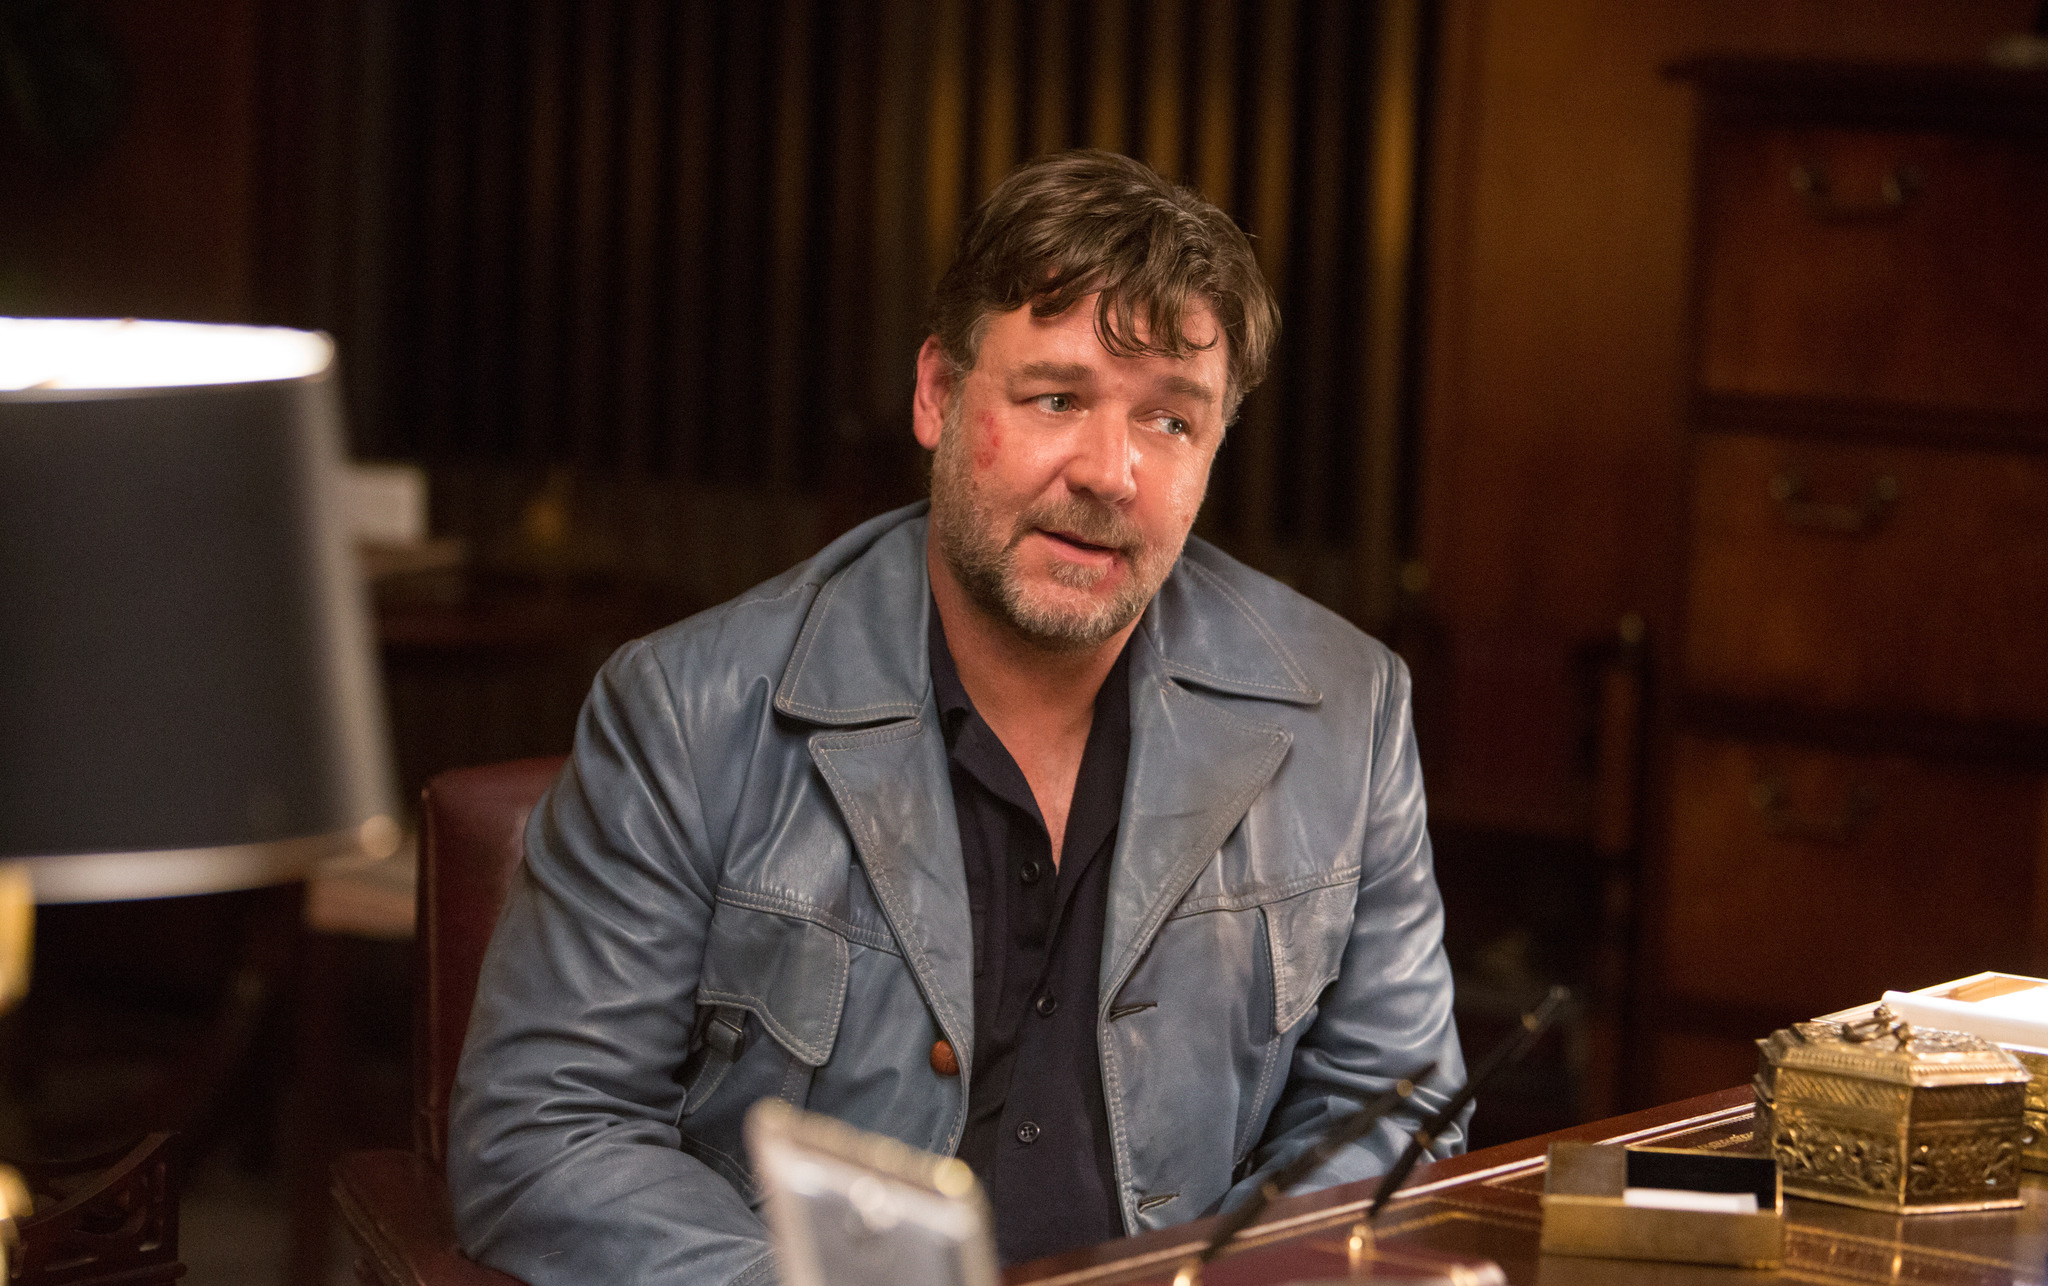 Russell Crowe got prank-called by Michael Jackson several times